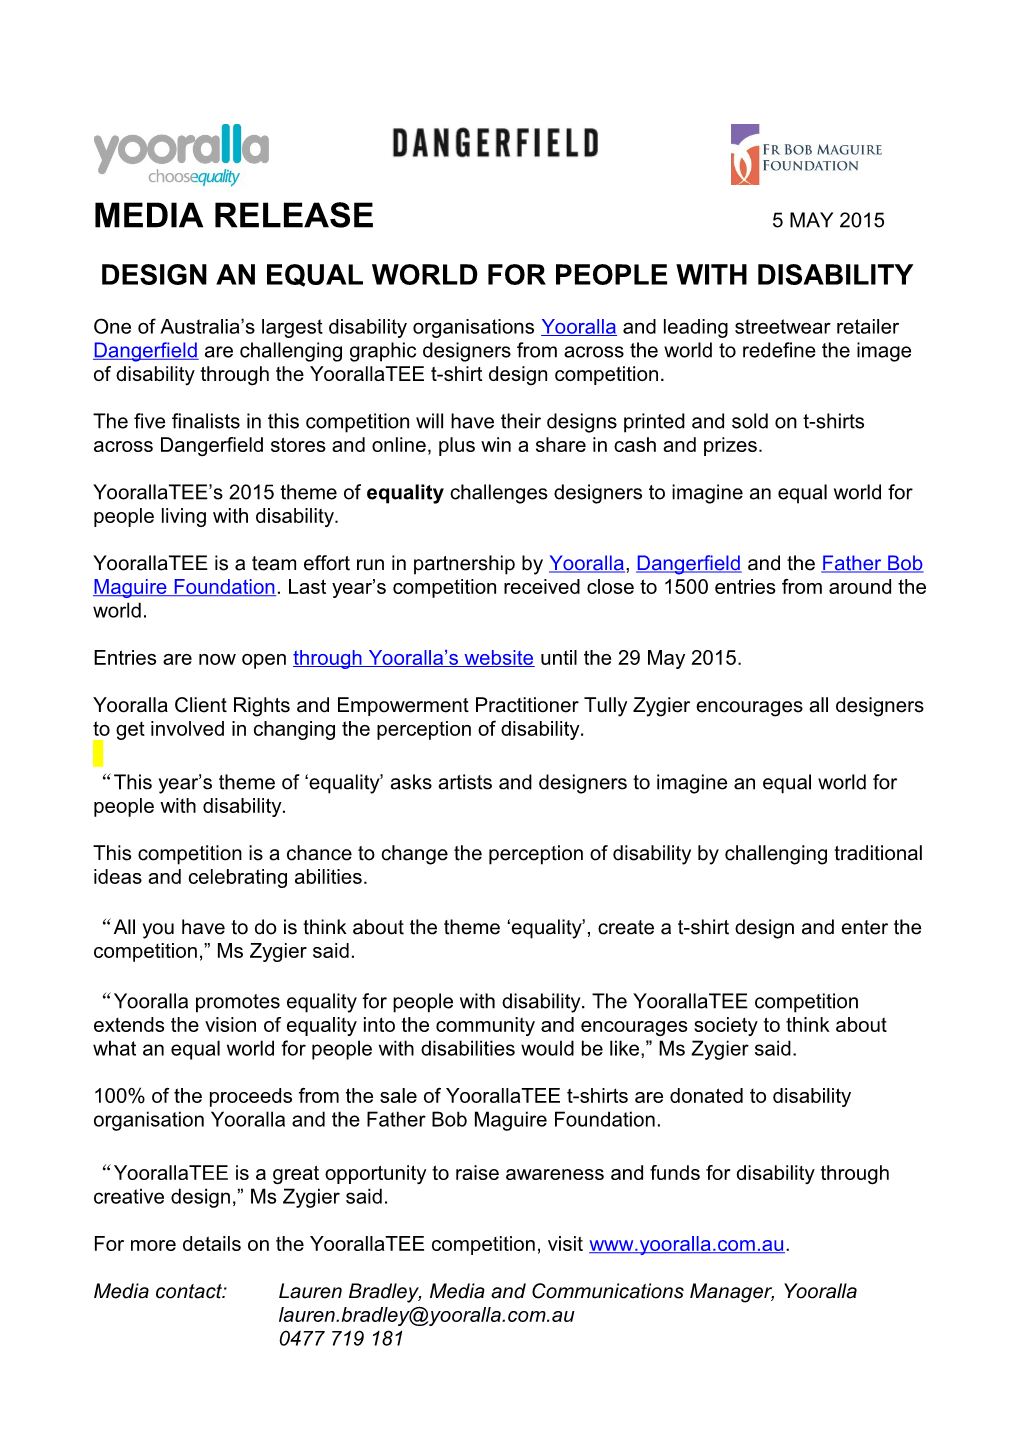 Design an Equal World for People with Disability